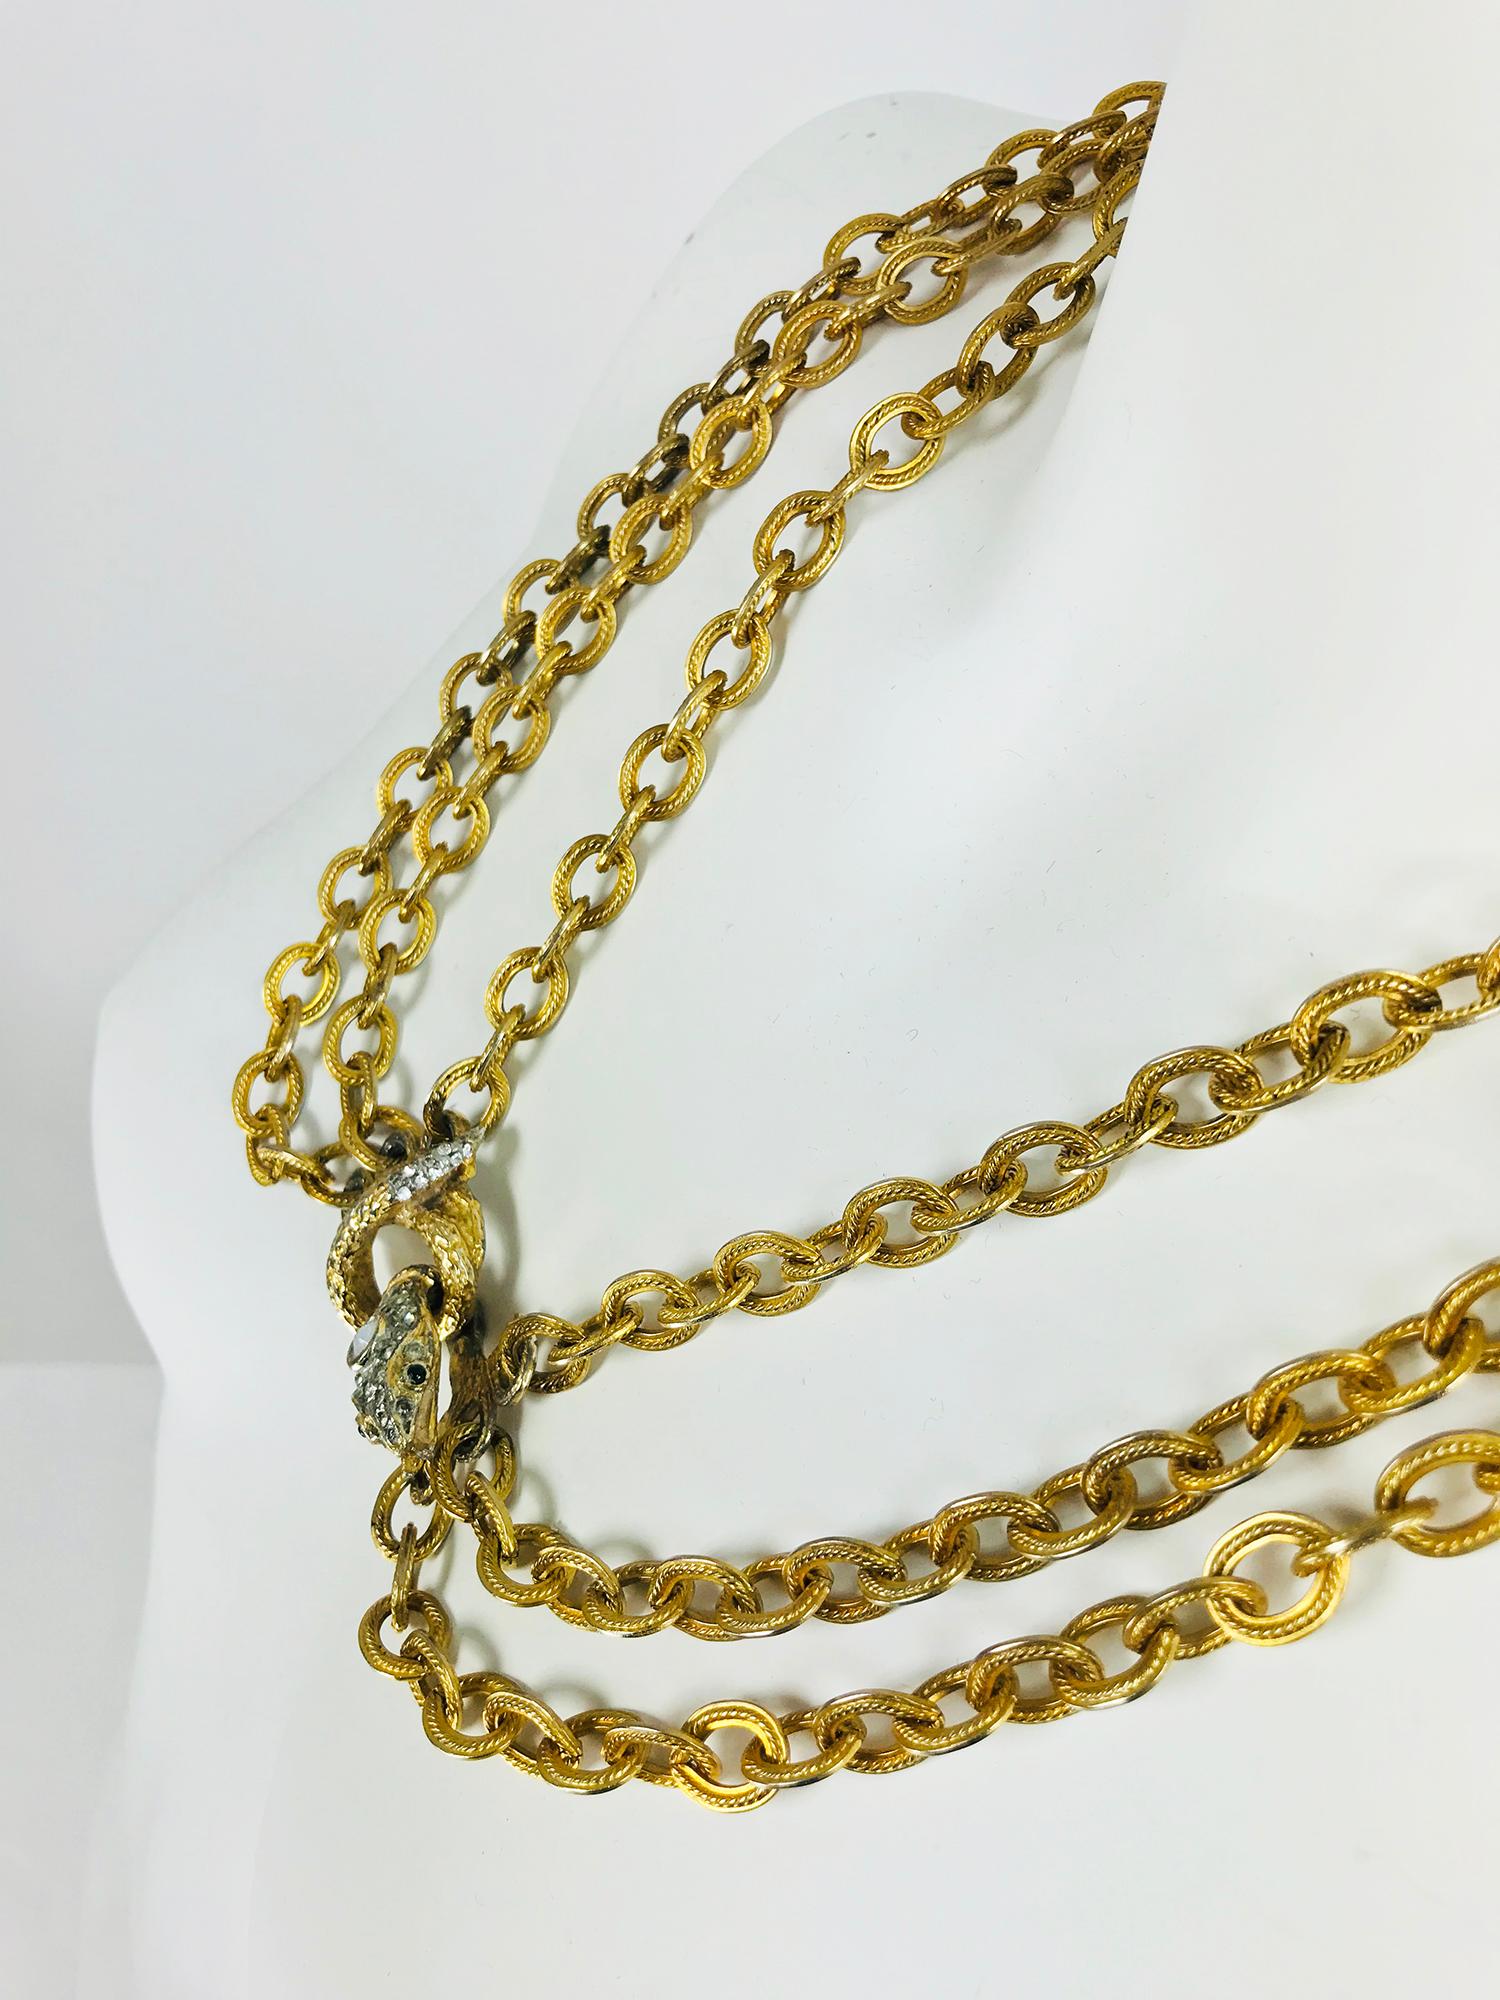 Snake Festoon Necklace in faux Gold and Rhinestone Vintage 2